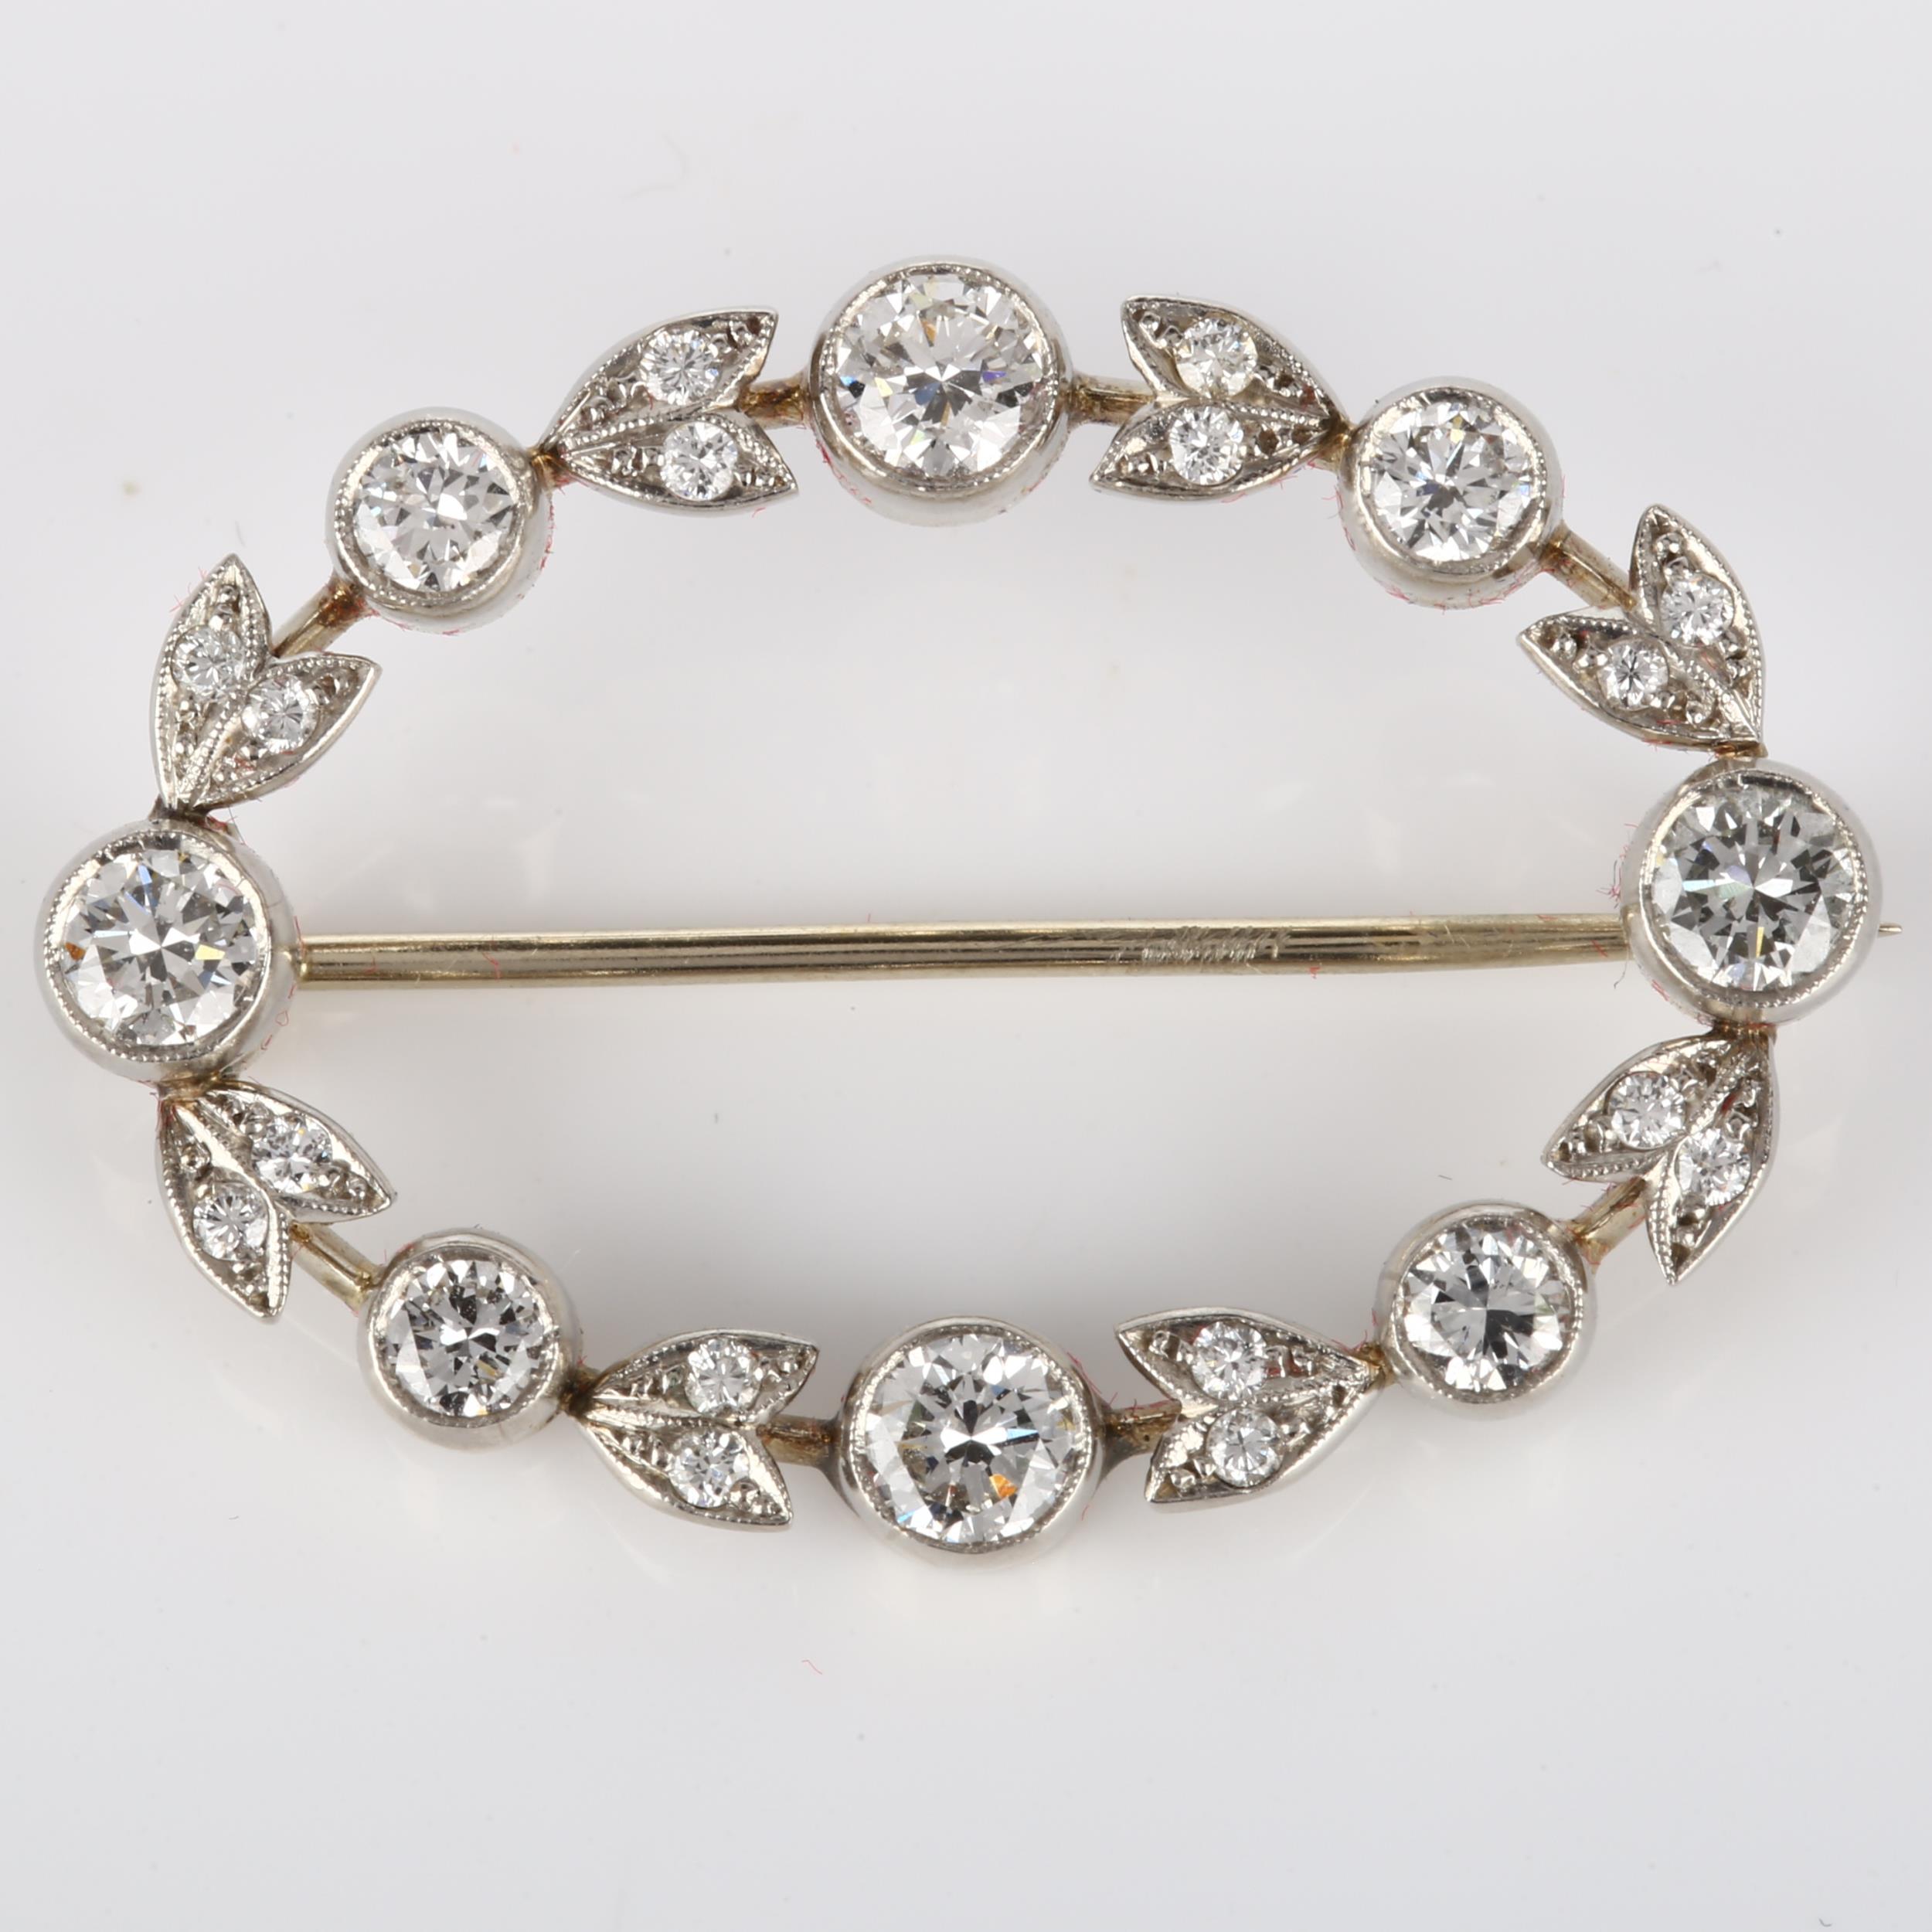 A Belle Epoque diamond brooch, openwork oval form with floral design set with modern round